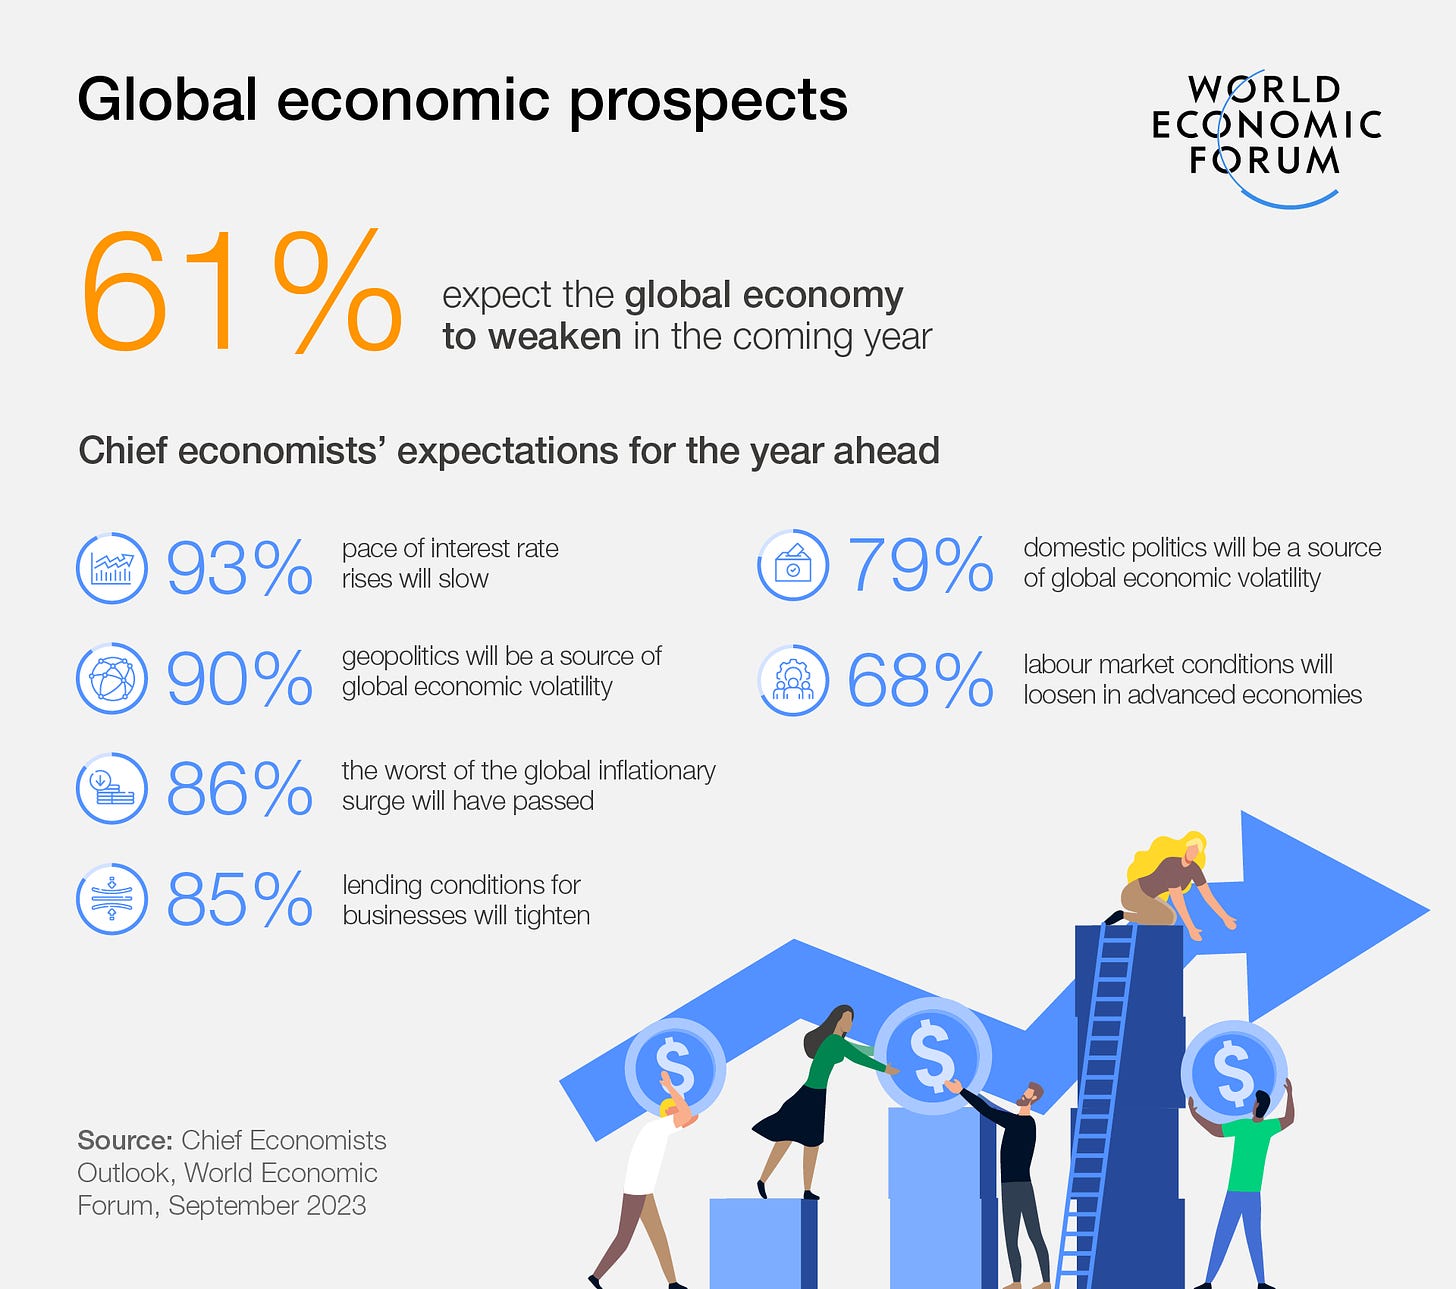 61% expect the global economy to weaken in the coming year.